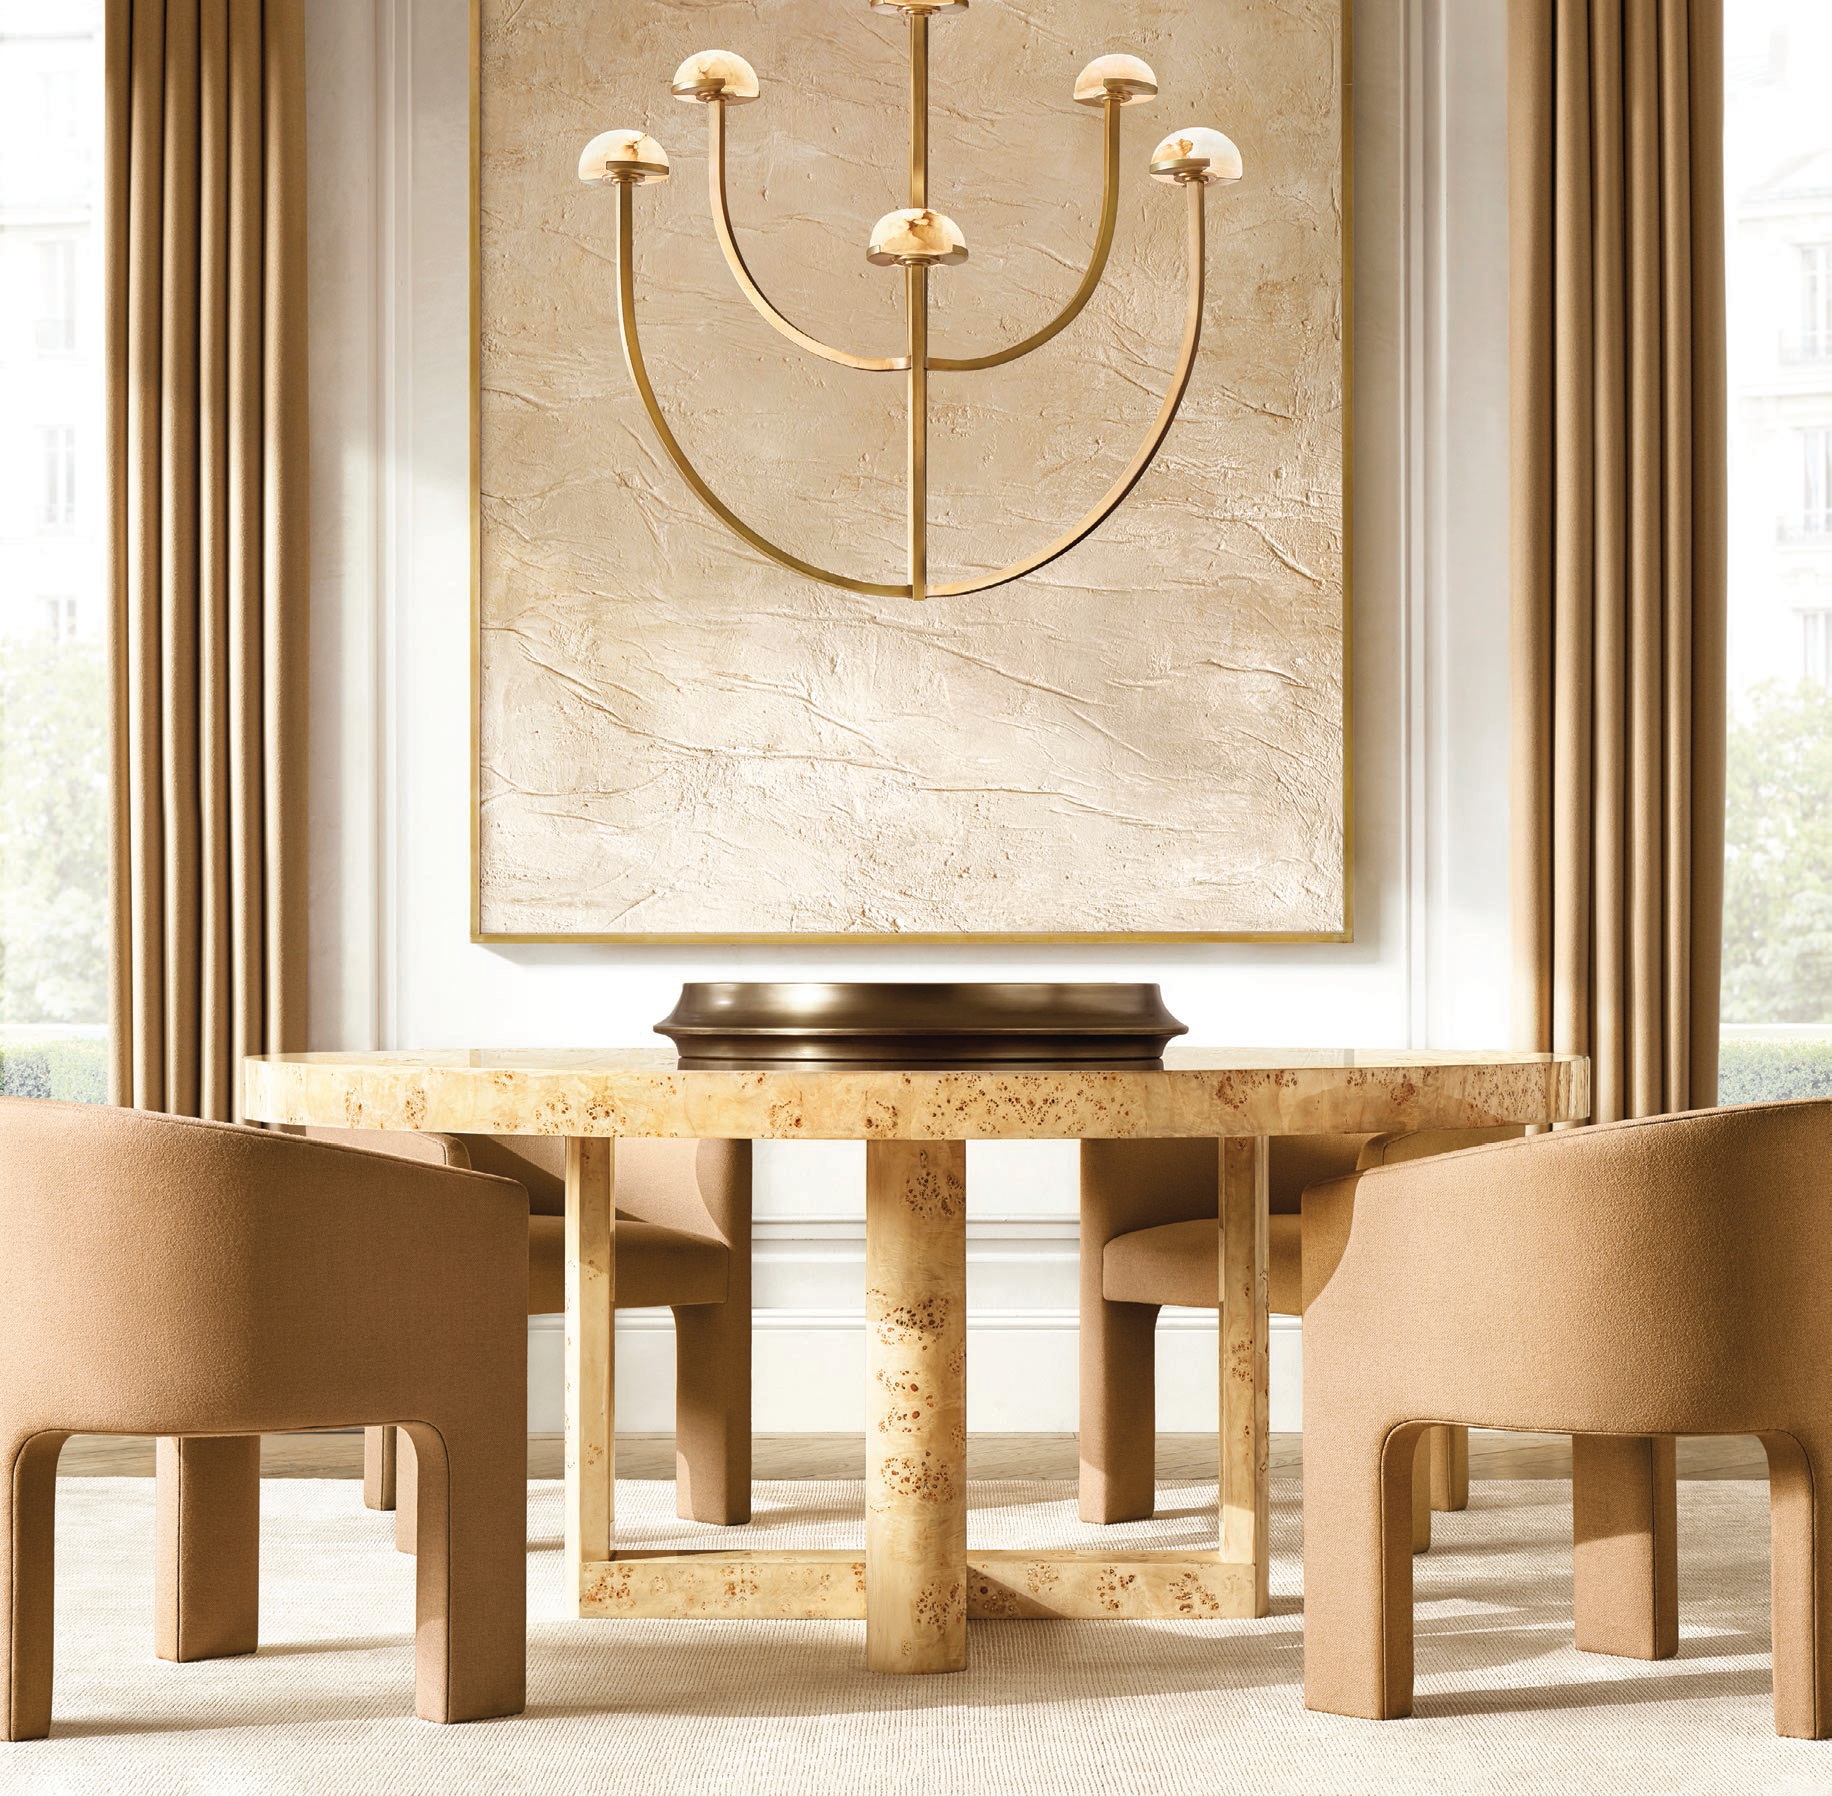 RH Contemporary Bardot Burl round dining table and Inés Dining Chair by the Van Thiels PHOTO COURTESY OF BRAND